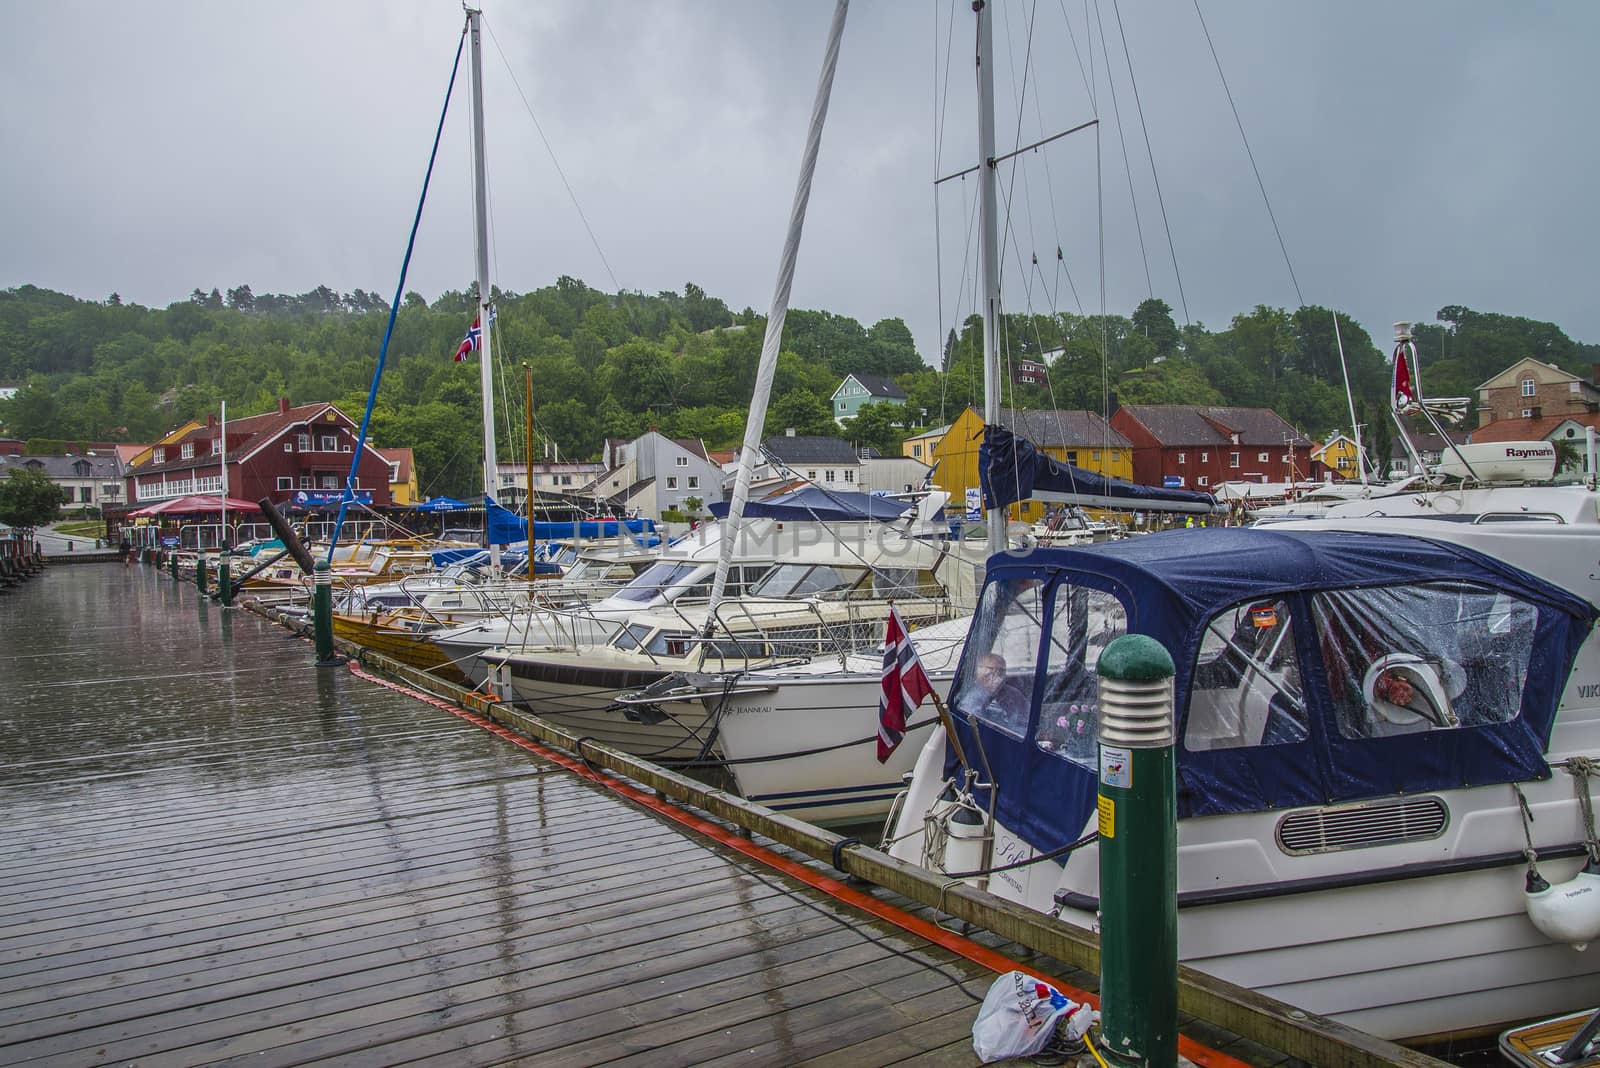 Exhibition of boats in the port of Halden by steirus